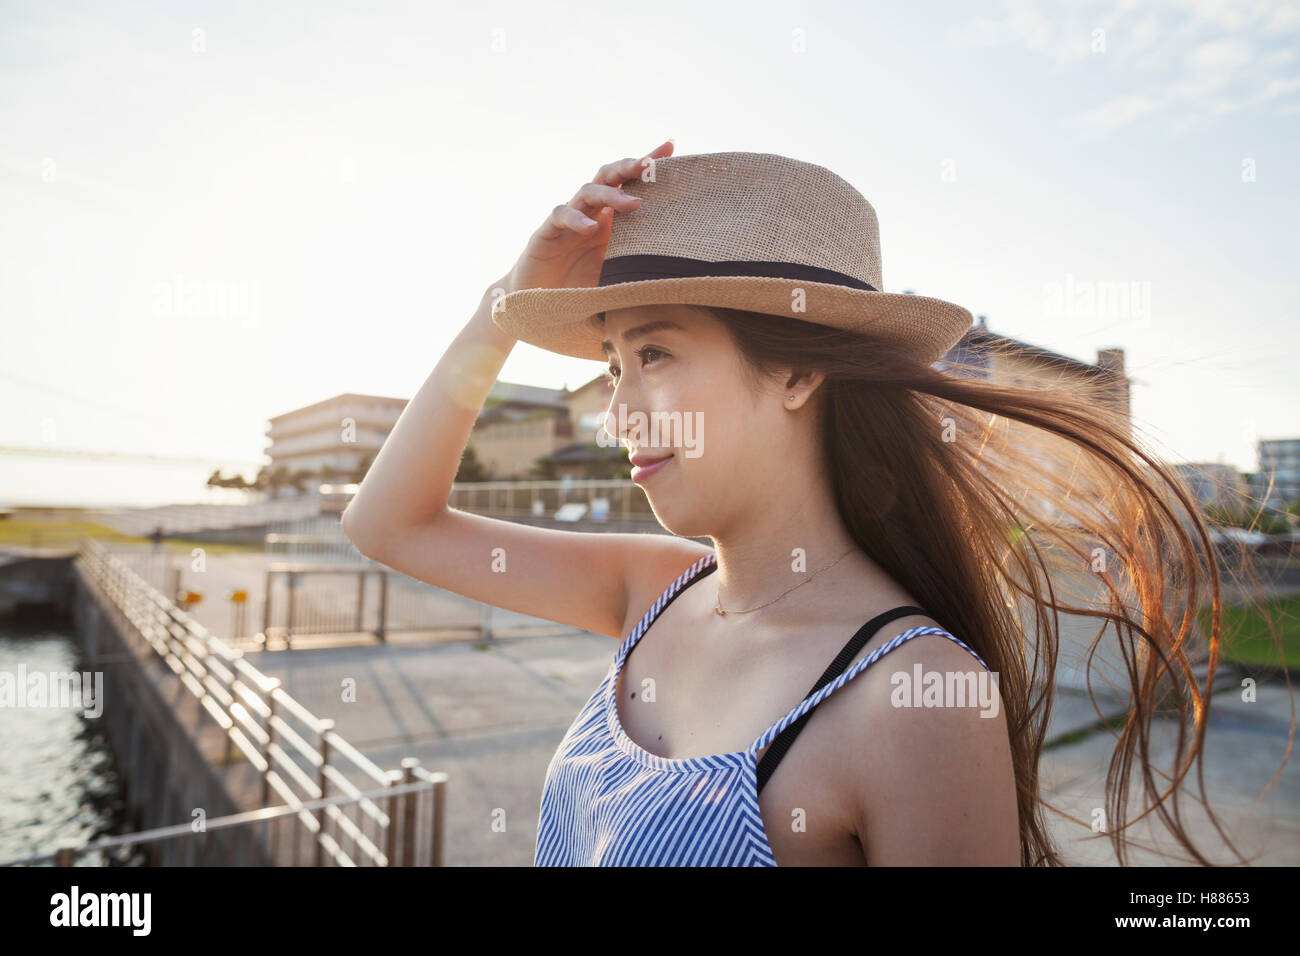 Young woman standing on a pier by water holding her straw hat on her head. Stock Photo